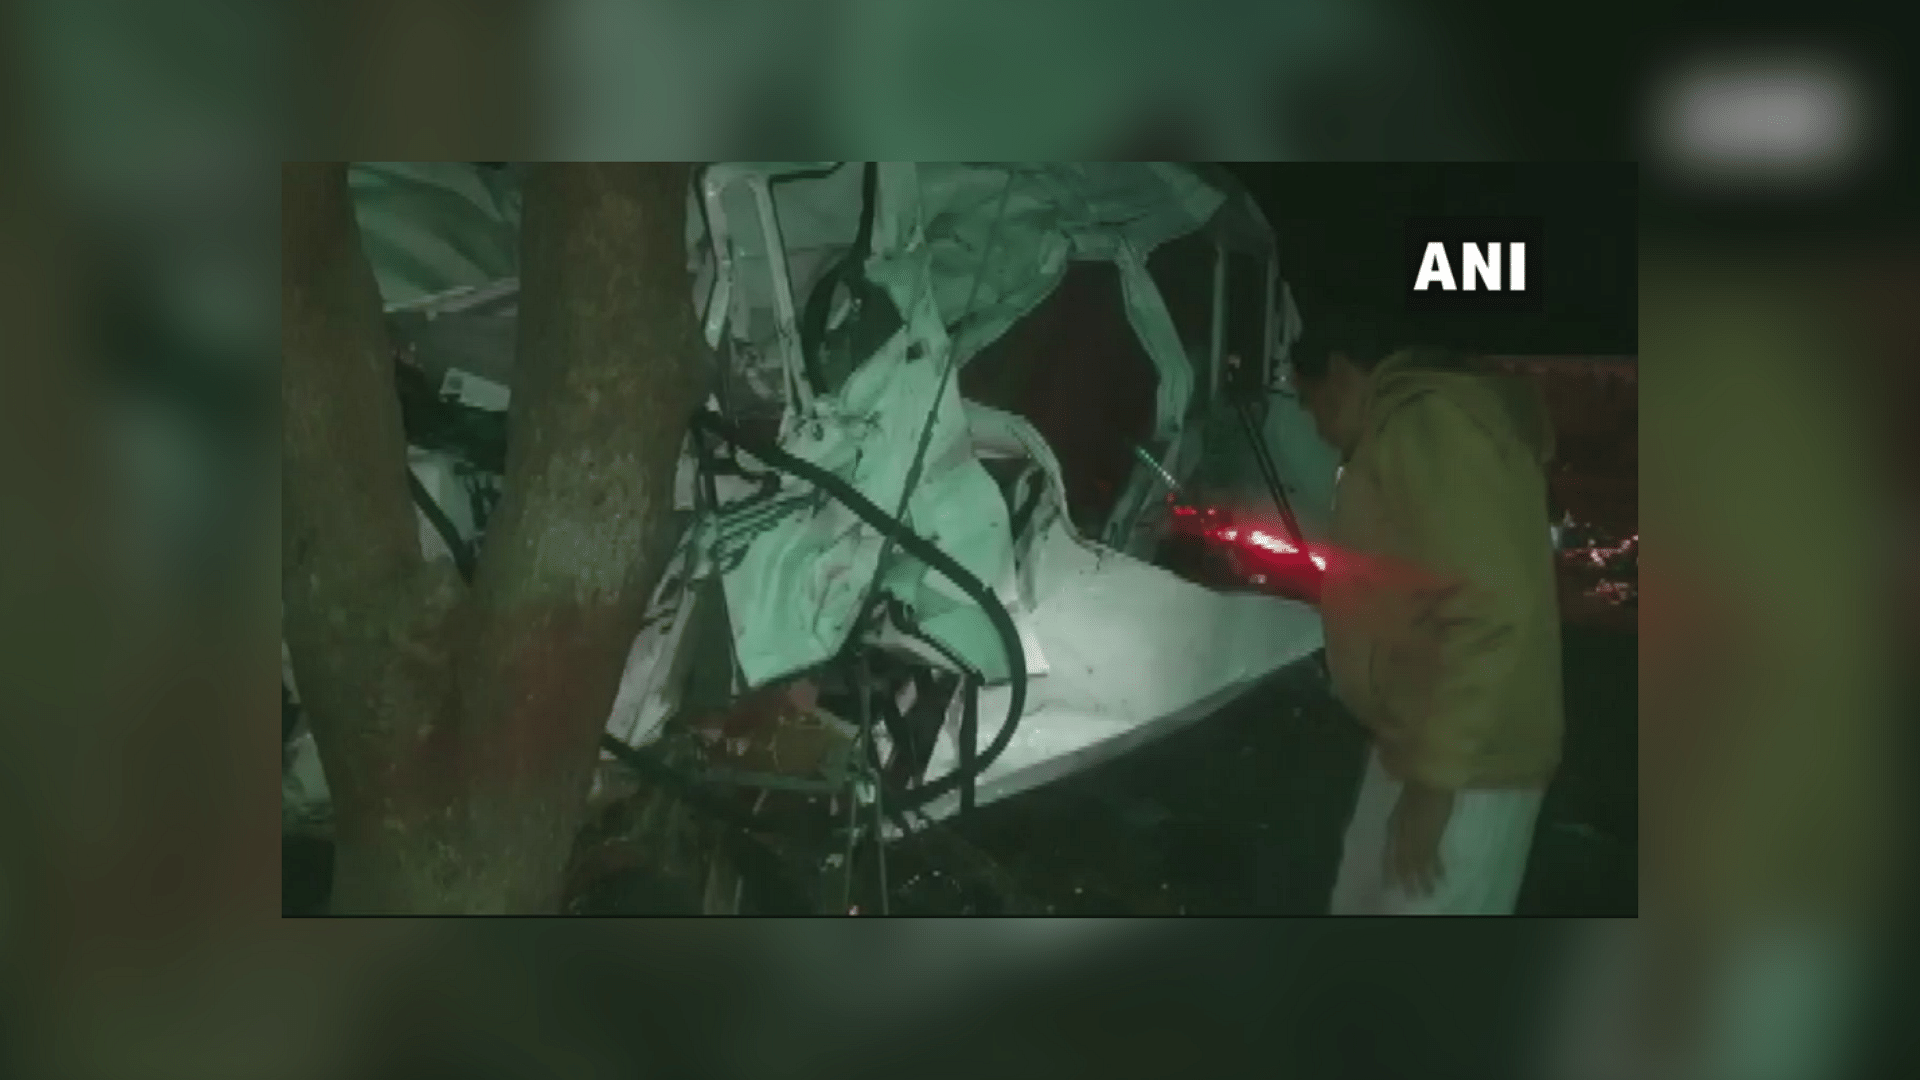 The accident occurred early in the morning, police said, adding that the victims were on their way to Hisar in Haryana from Maharashtra’s Latur.